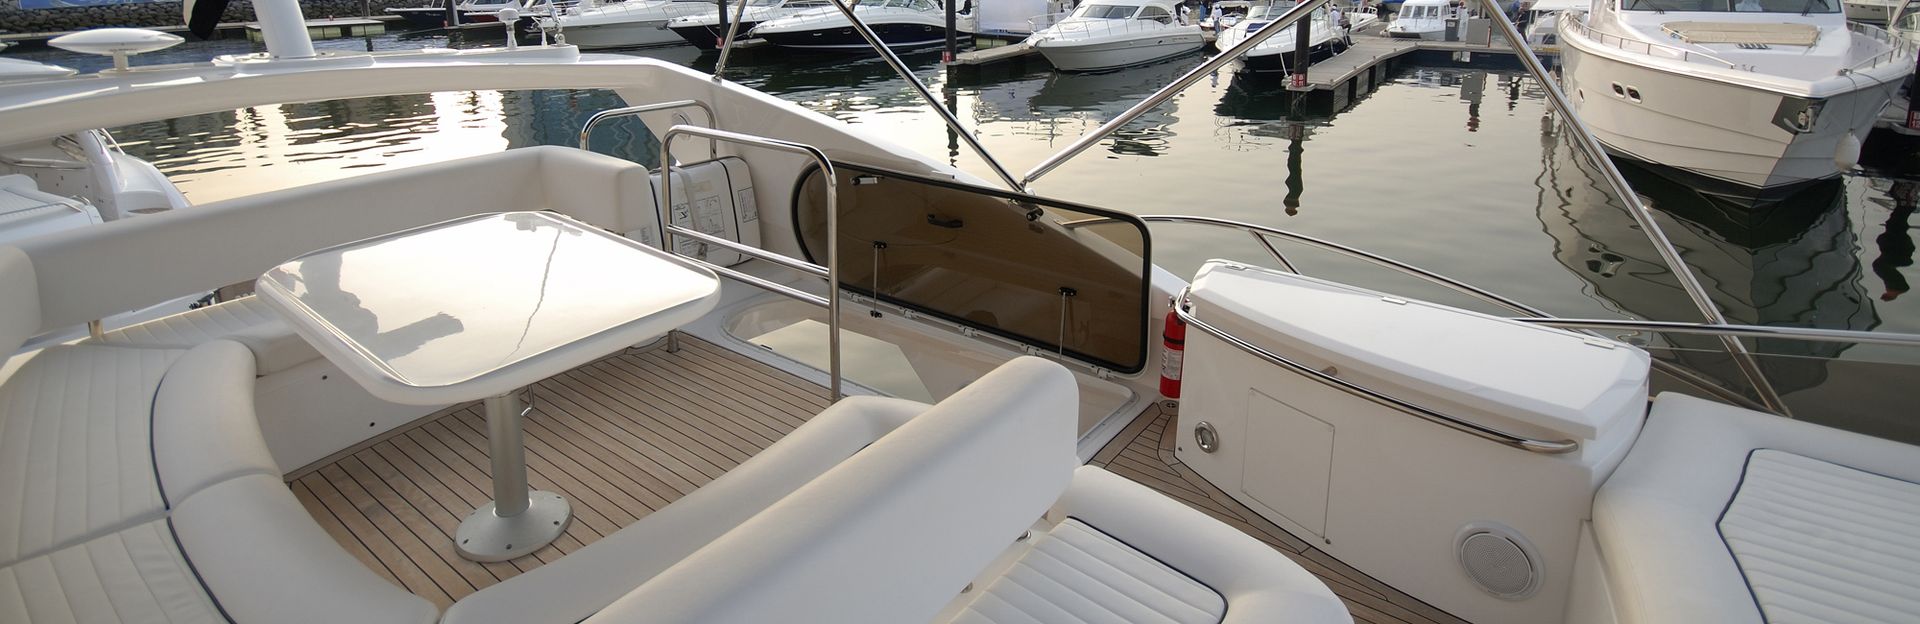 Contact Hamilton Auto & Marine Trimmers for luxury boat